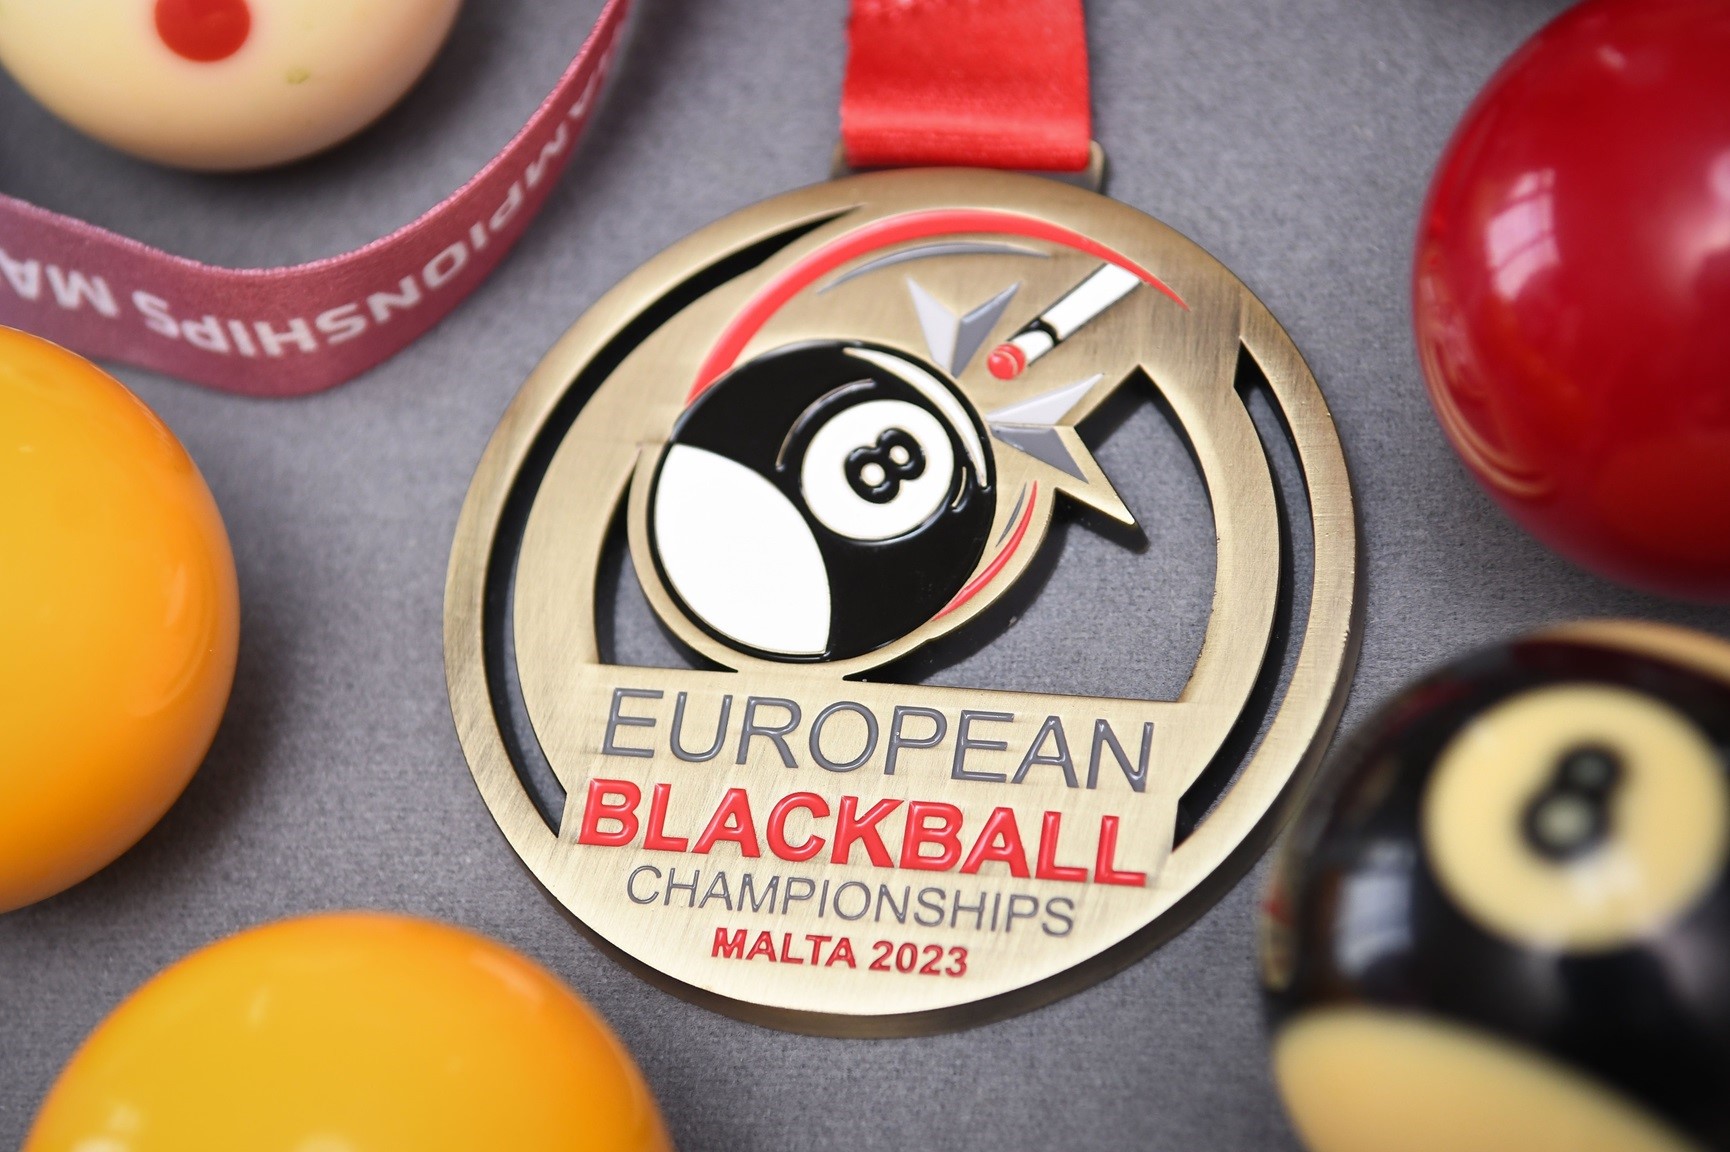 The bronze medal won by Mr Jones in Malta (National Lottery/PA)